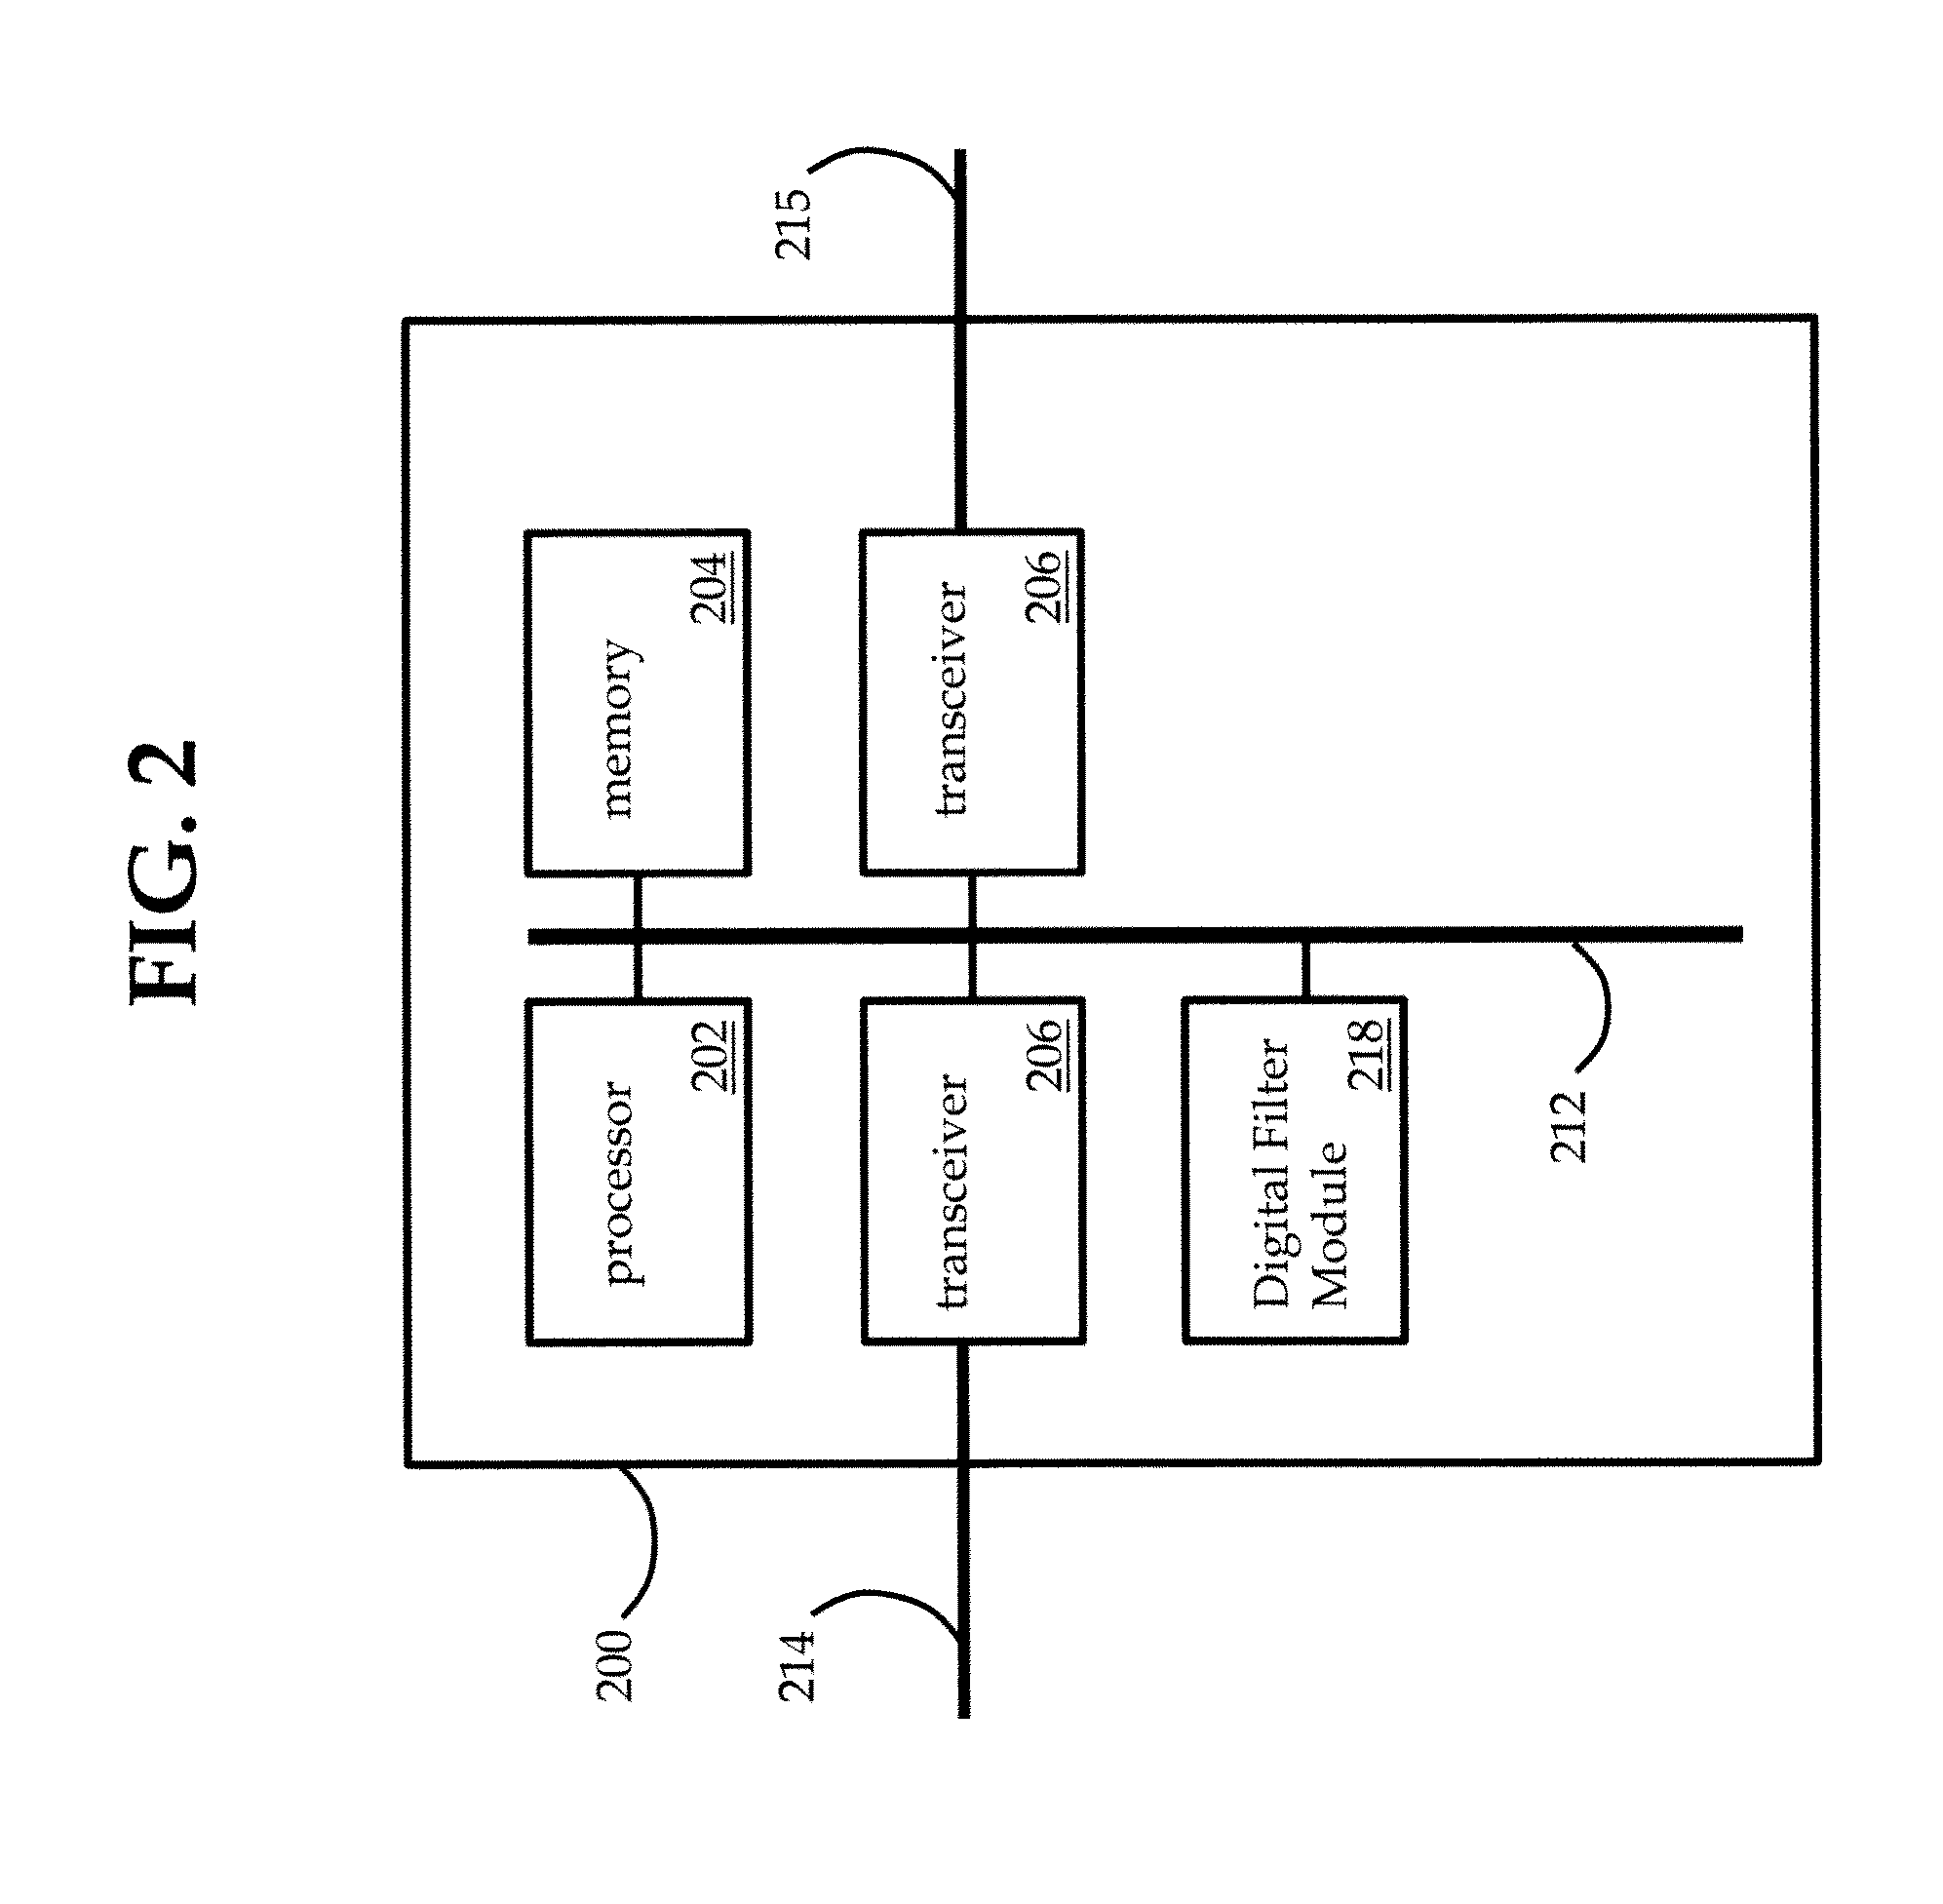 System and method for improving speech intelligibility of voice calls using common speech codecs